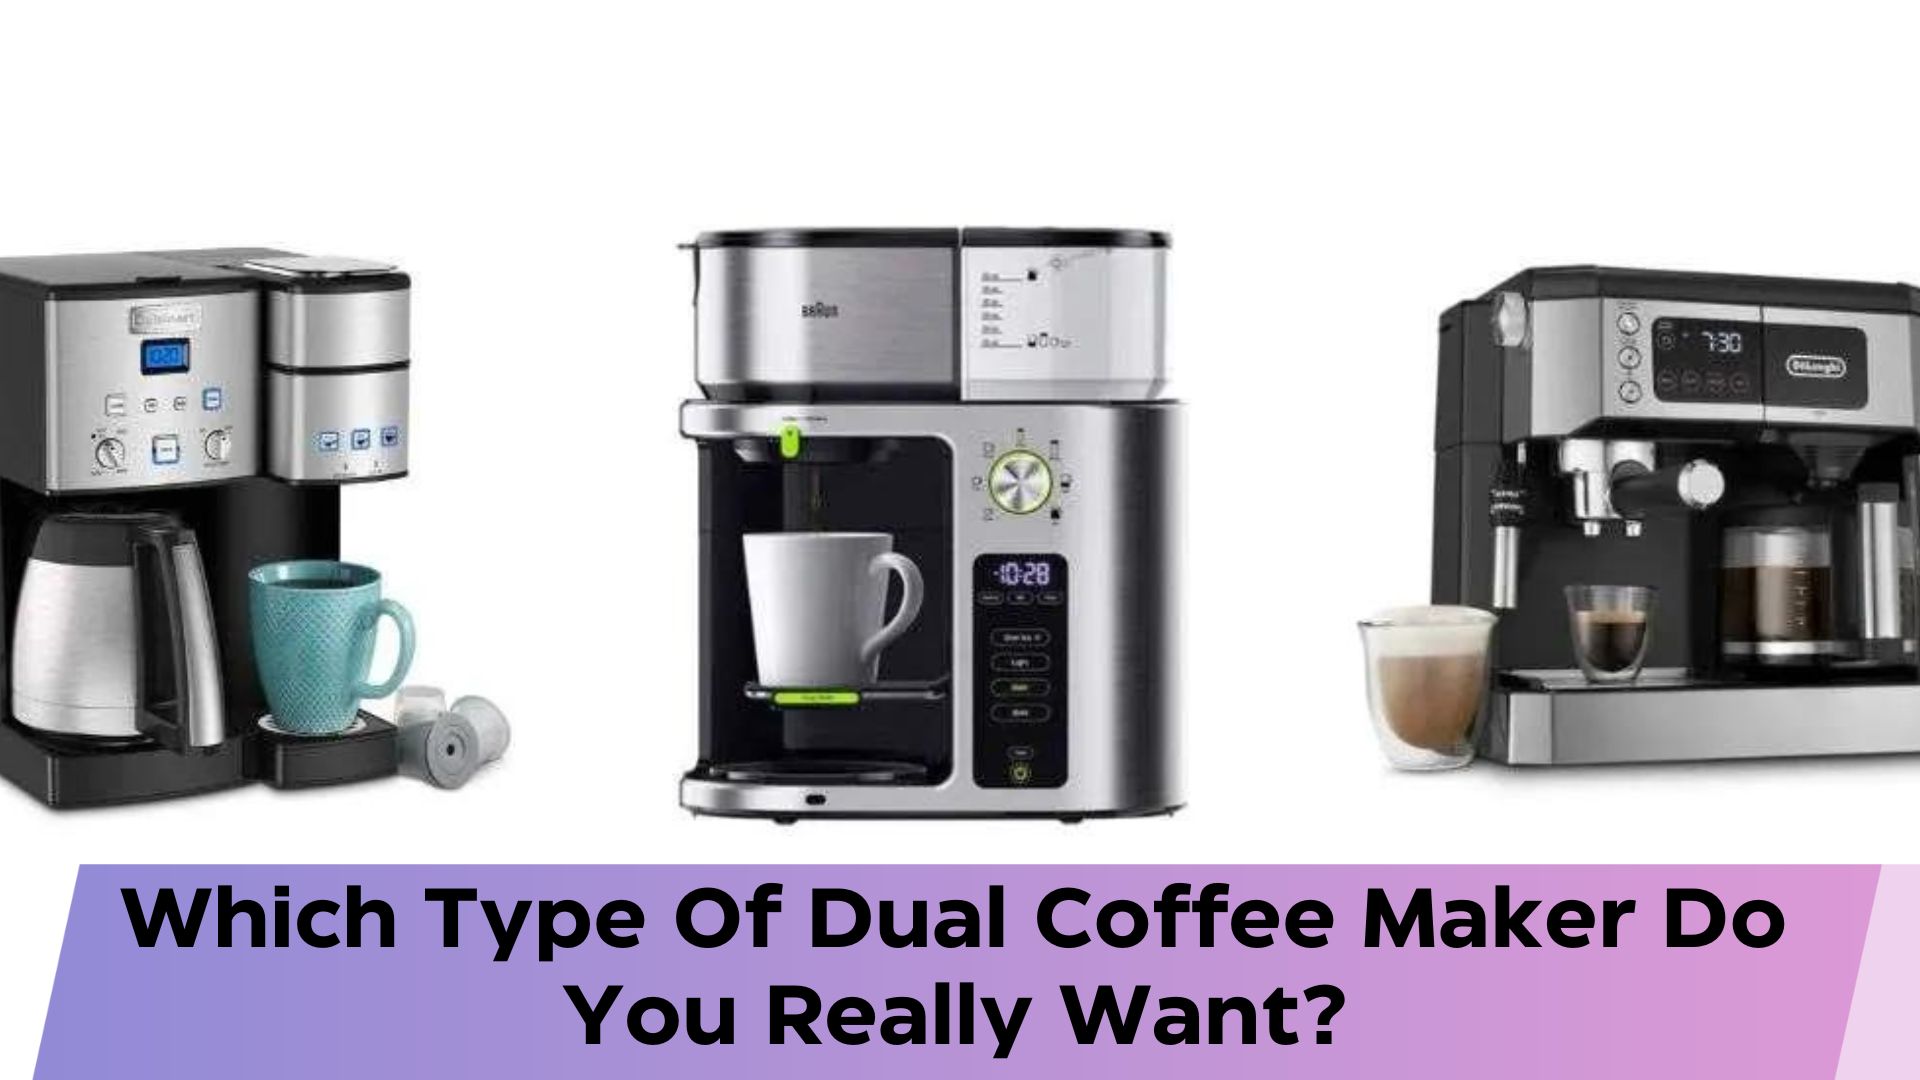 Which Type Of Dual Coffee Maker Do You Really Want?